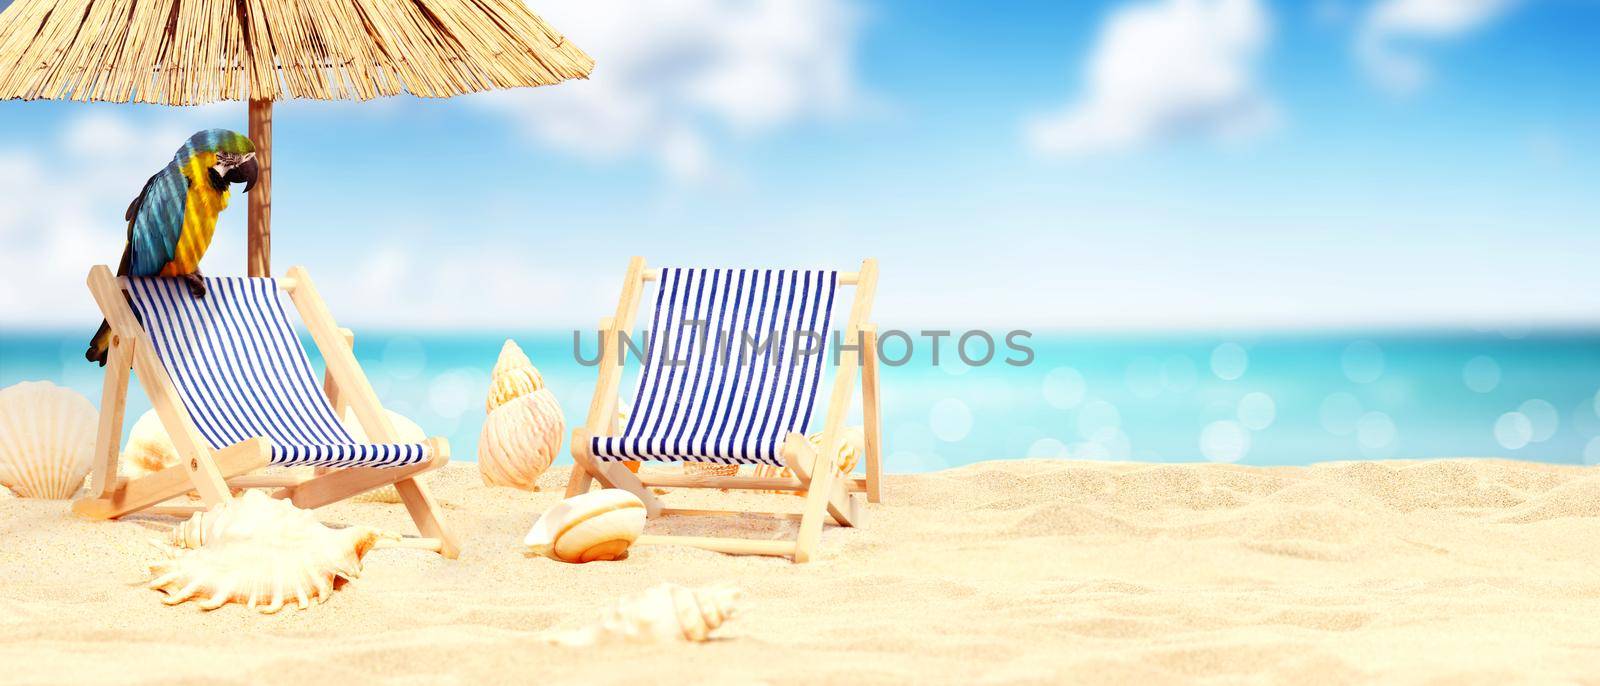 Wooden deck chairs with parrot on sandy beach near sea. Holiday background.